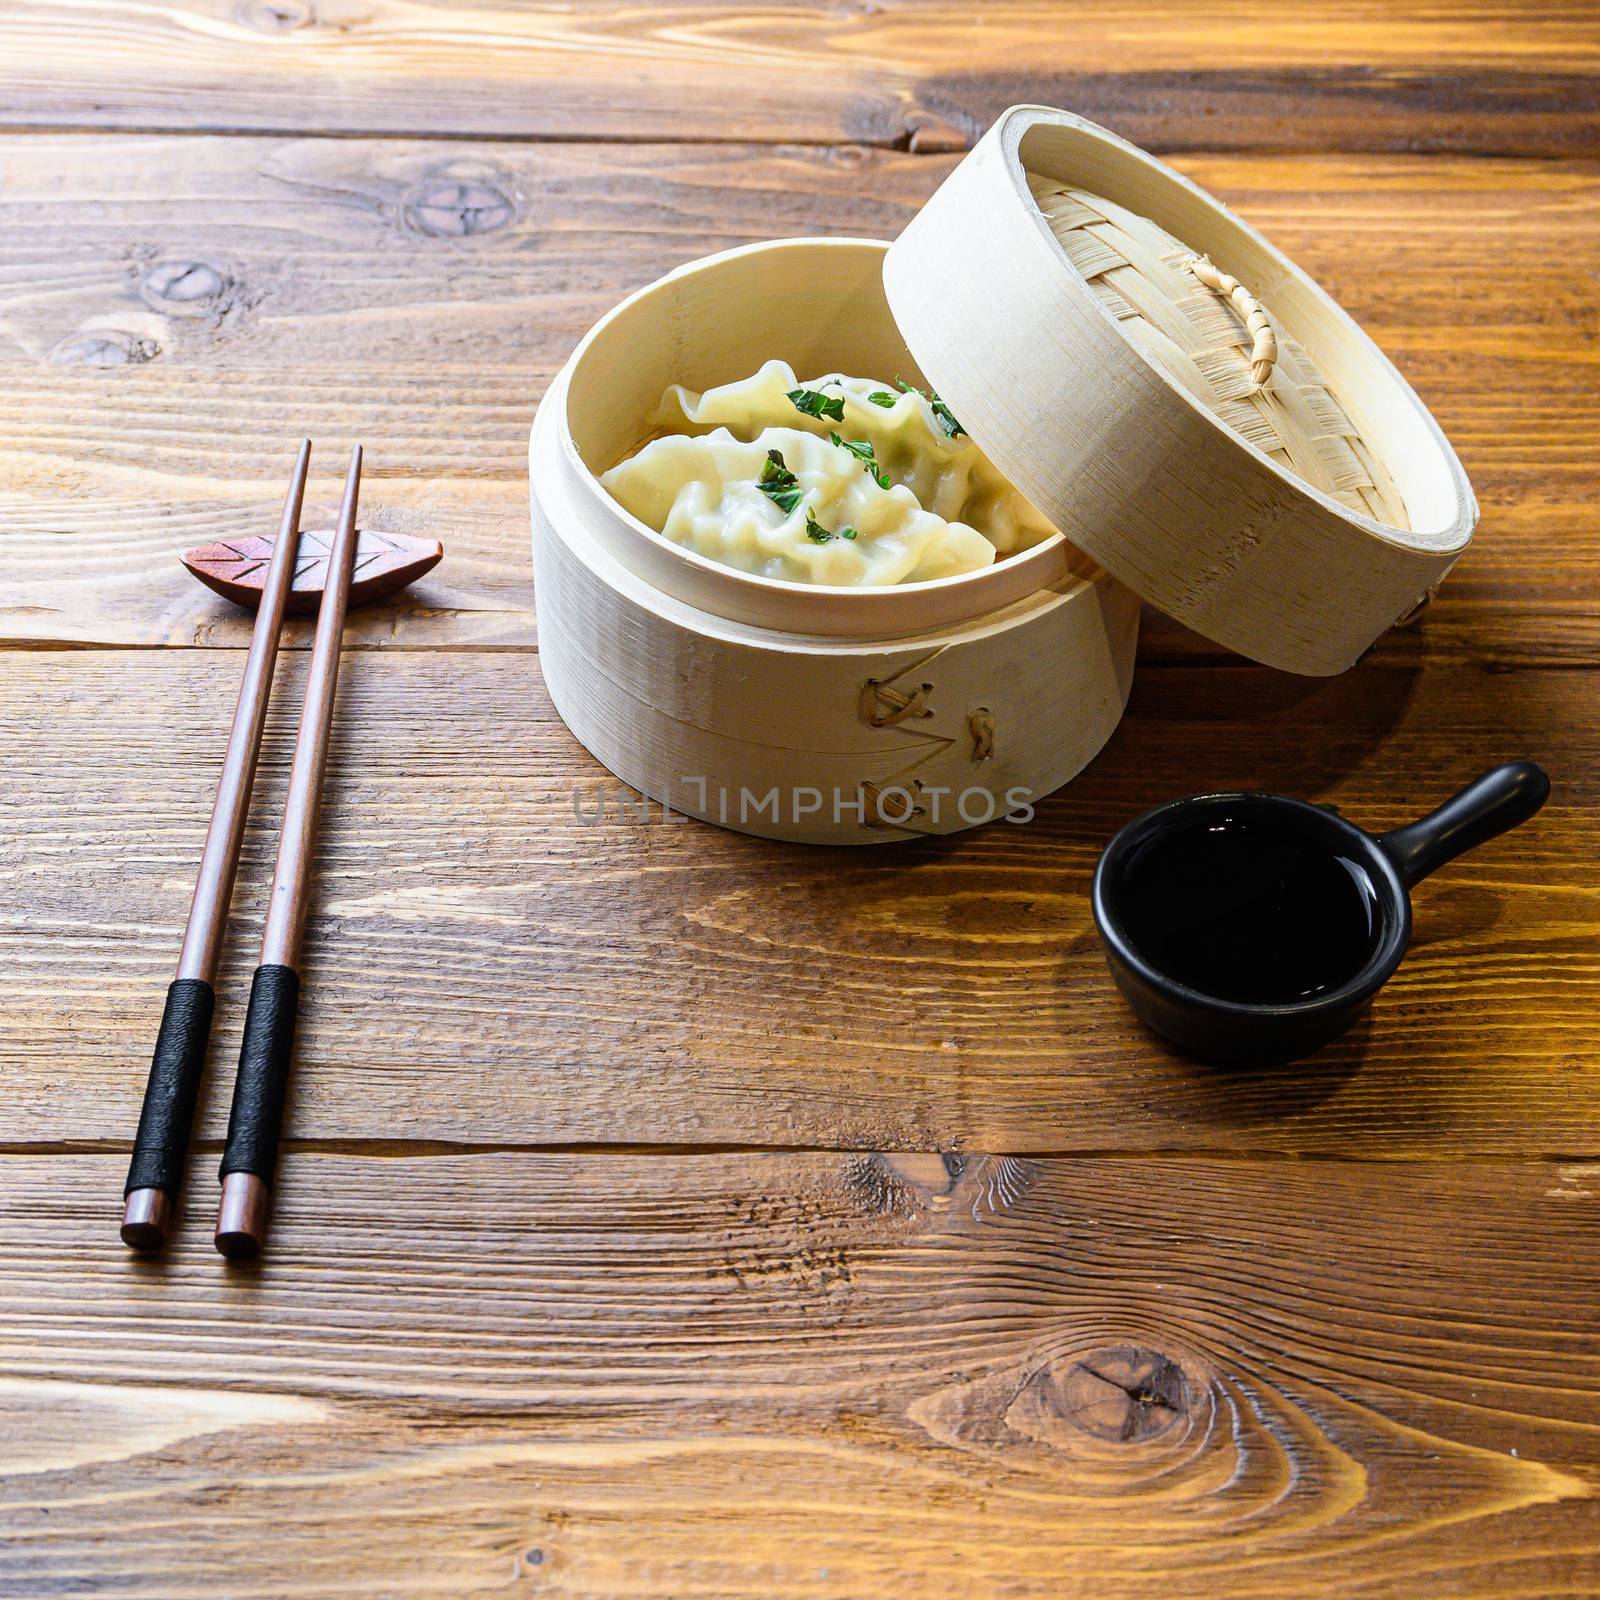 Japanese gyoza or dumplings snack with soy sauce in wooden steamer on wood japan table side view. by Ilianesolenyi